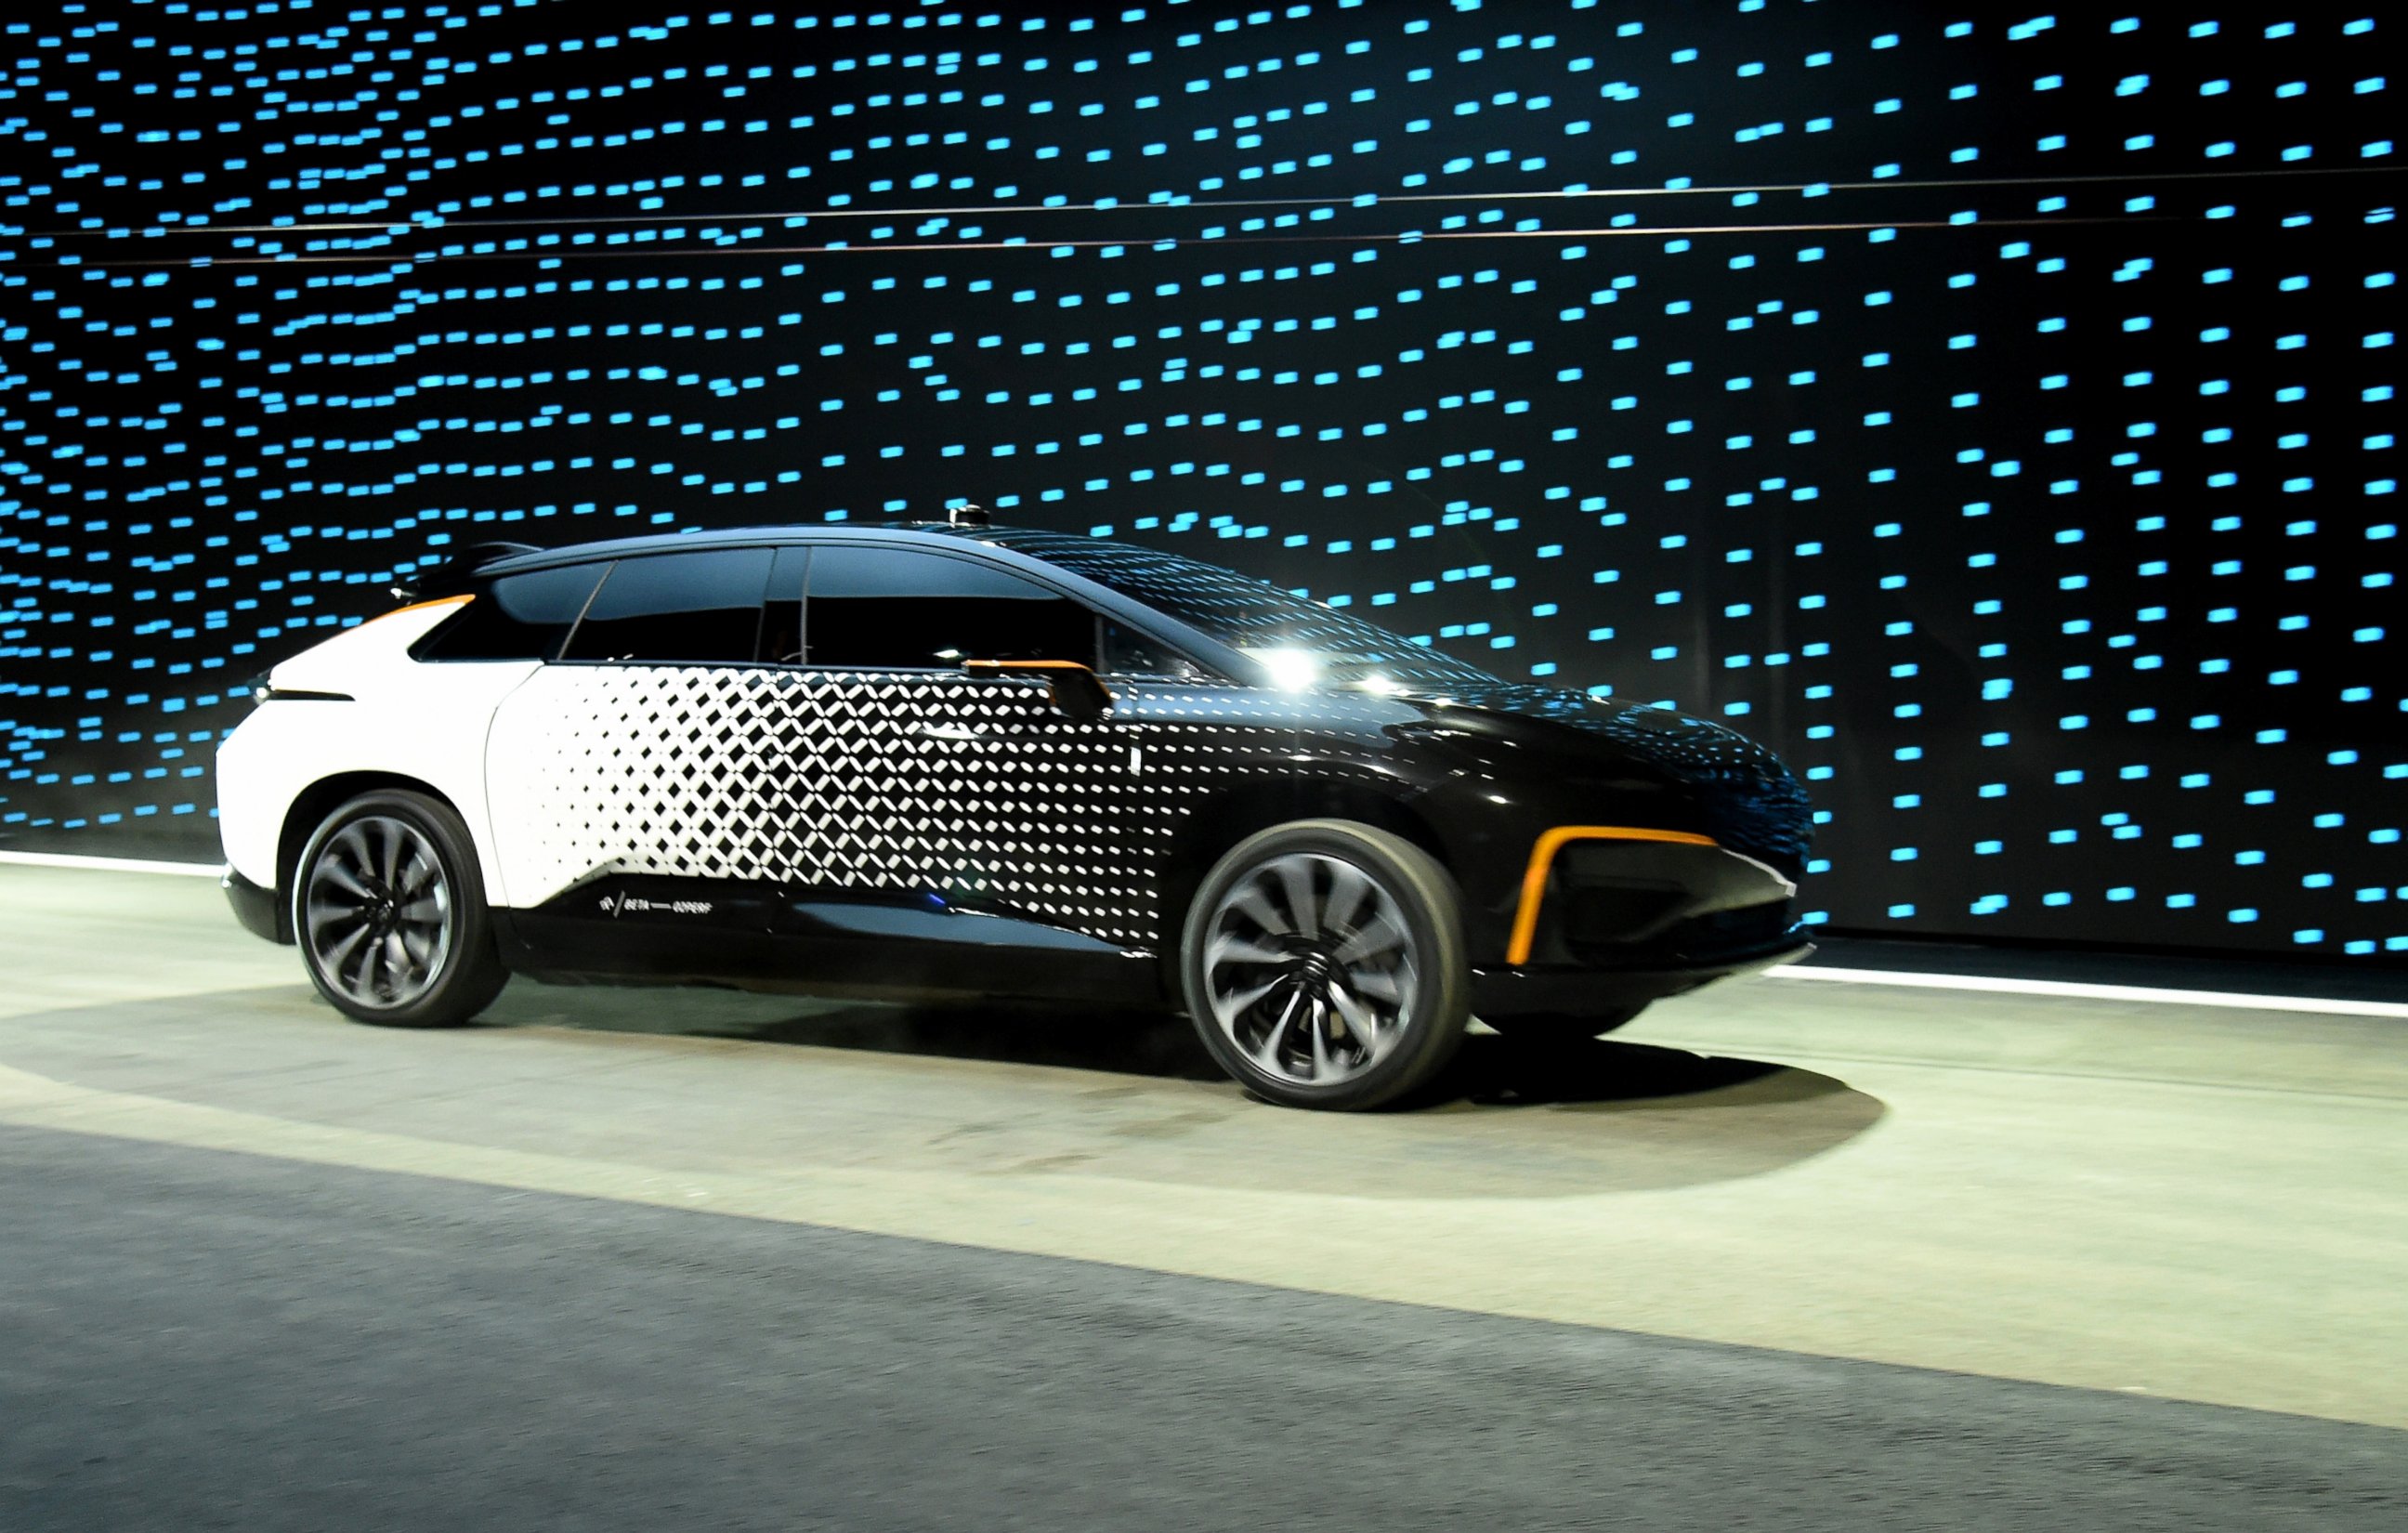 PHOTO: Faraday Future's FF 91 prototype electric crossover vehicle is shown during a speed test as it is unveiled during a press event for CES 2017 at The Pavilions at Las Vegas Market, Jan. 3, 2017 in Las Vegas. 